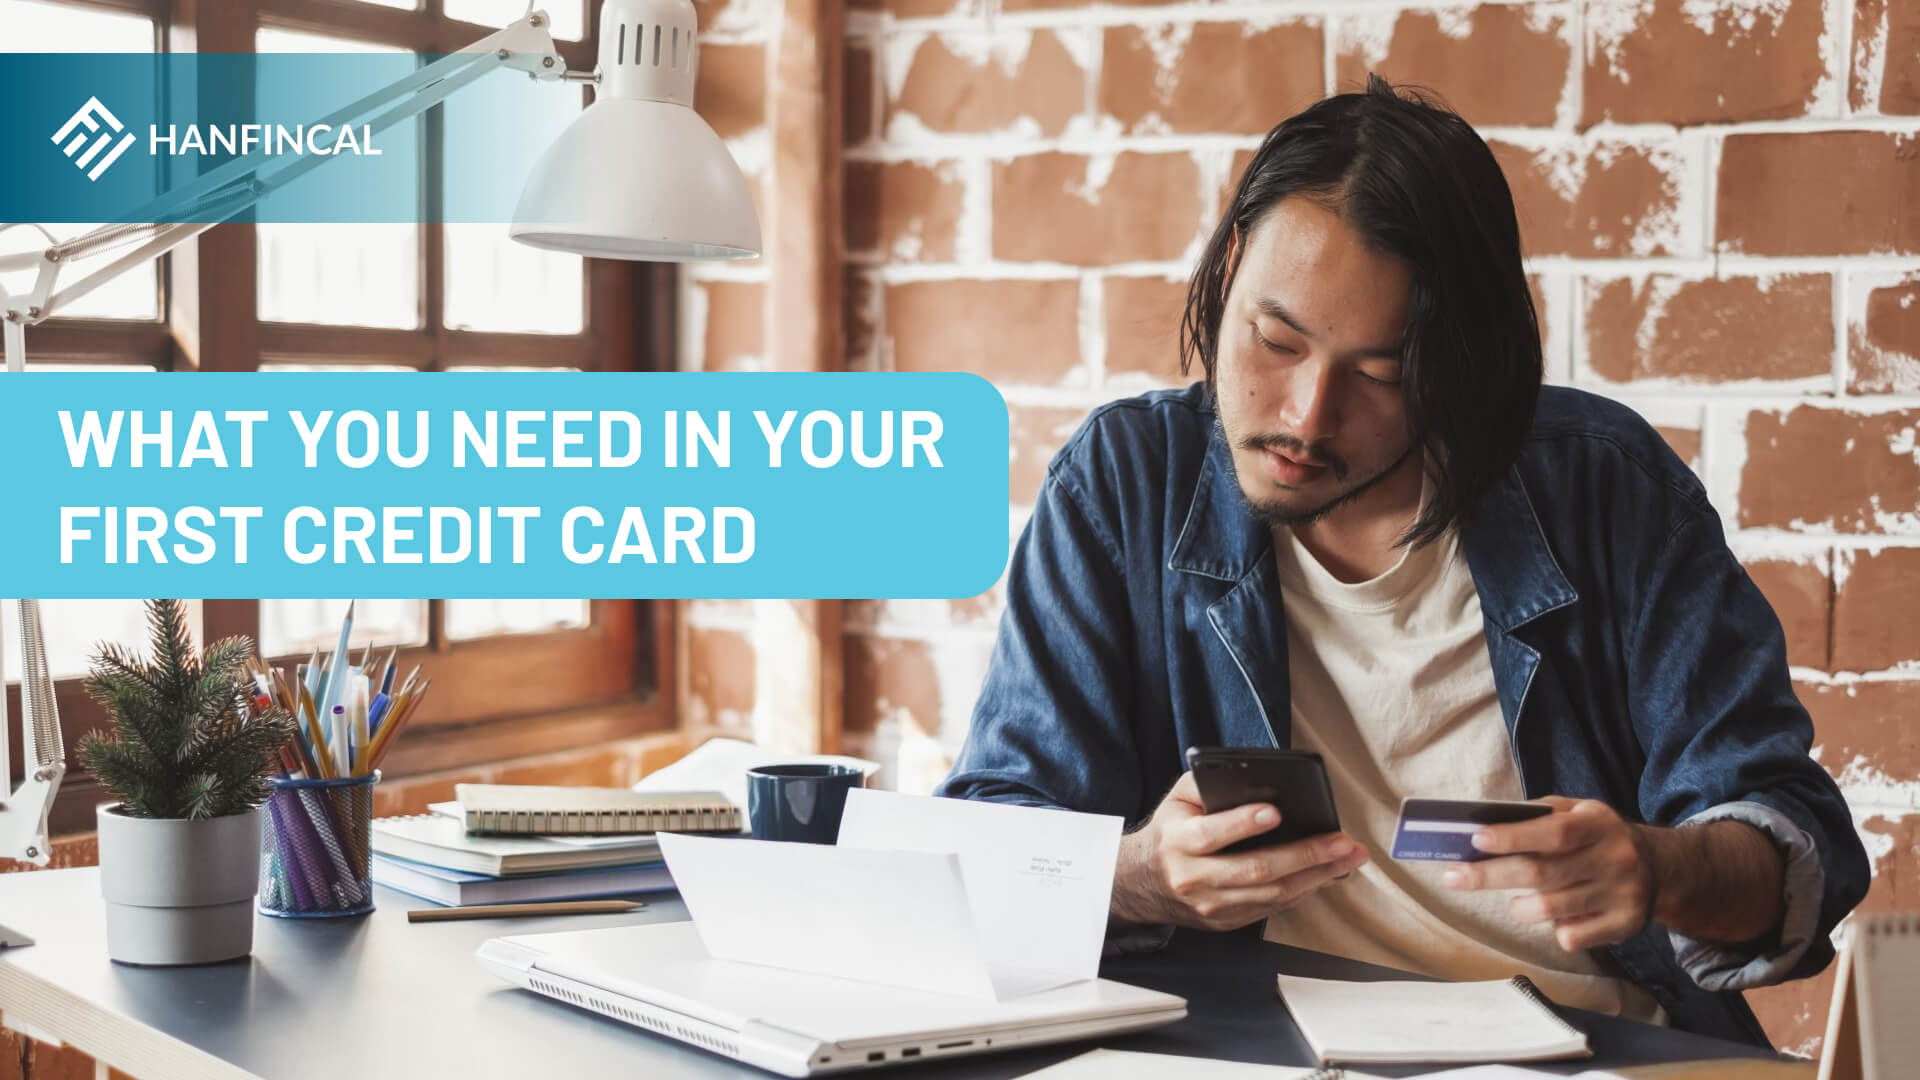 What do you need for your first credit card?